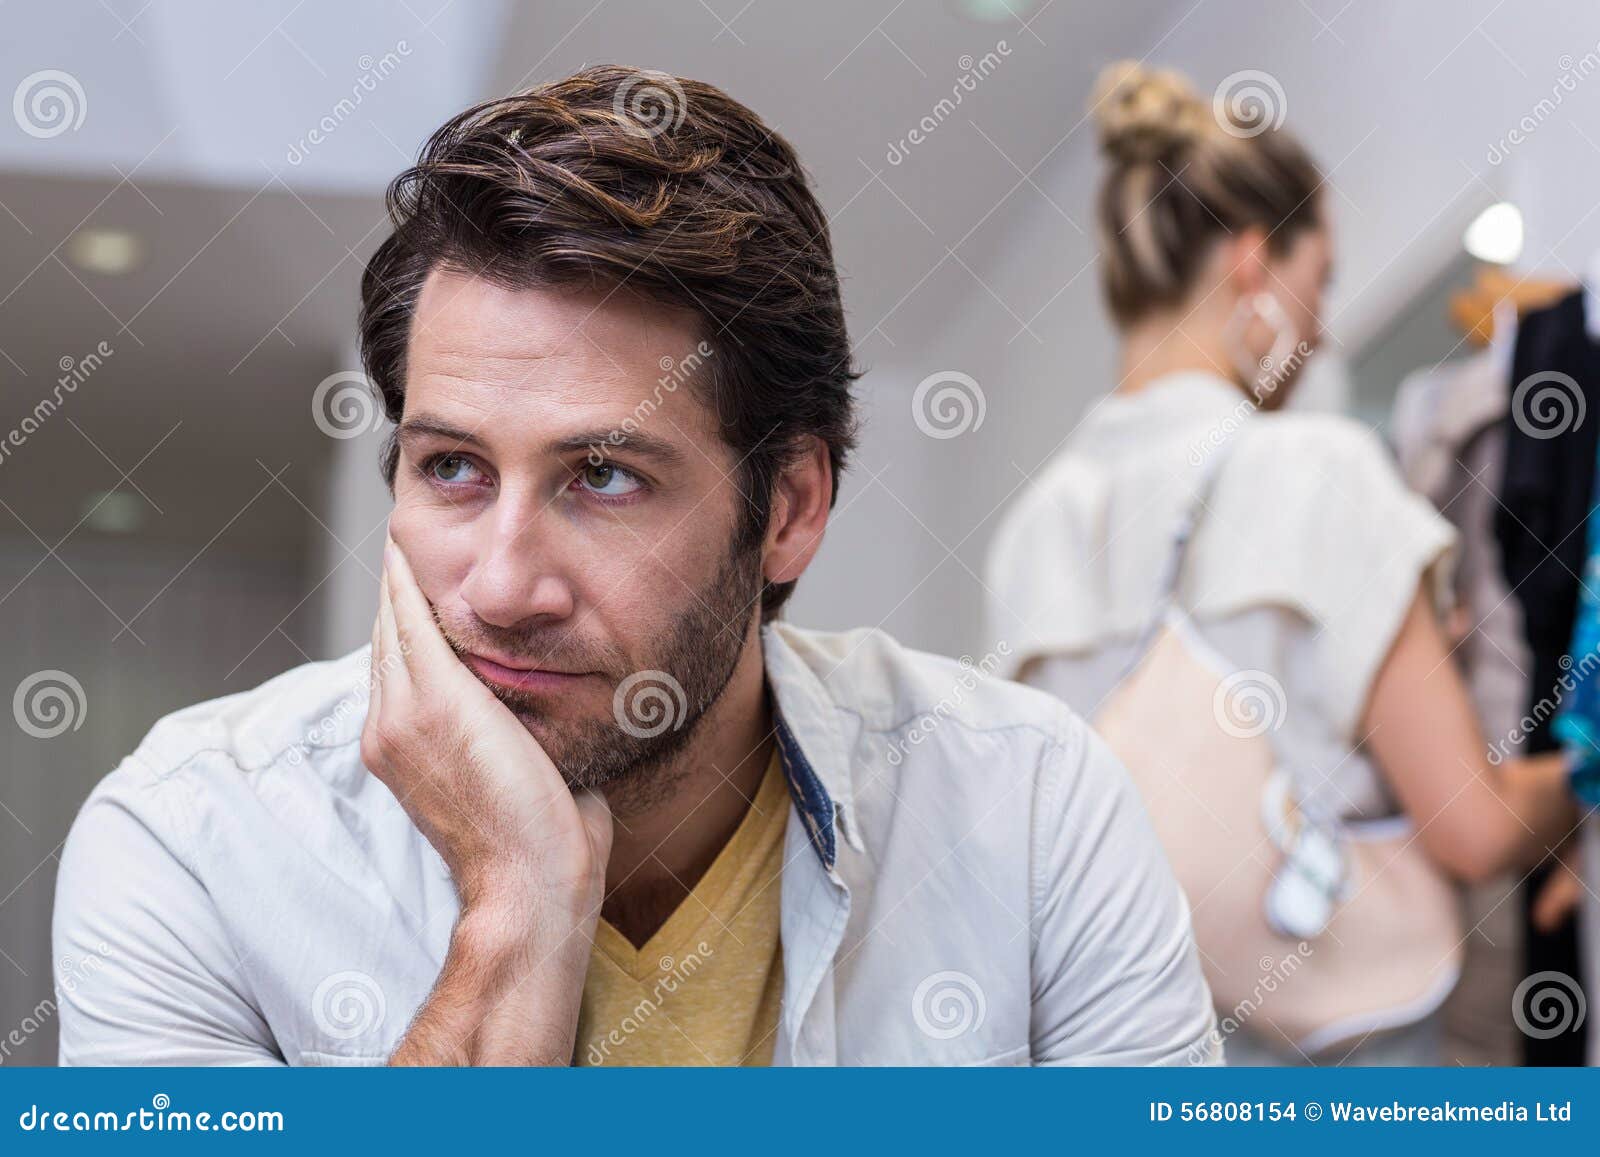 bored man sitting in front of his girlfriend